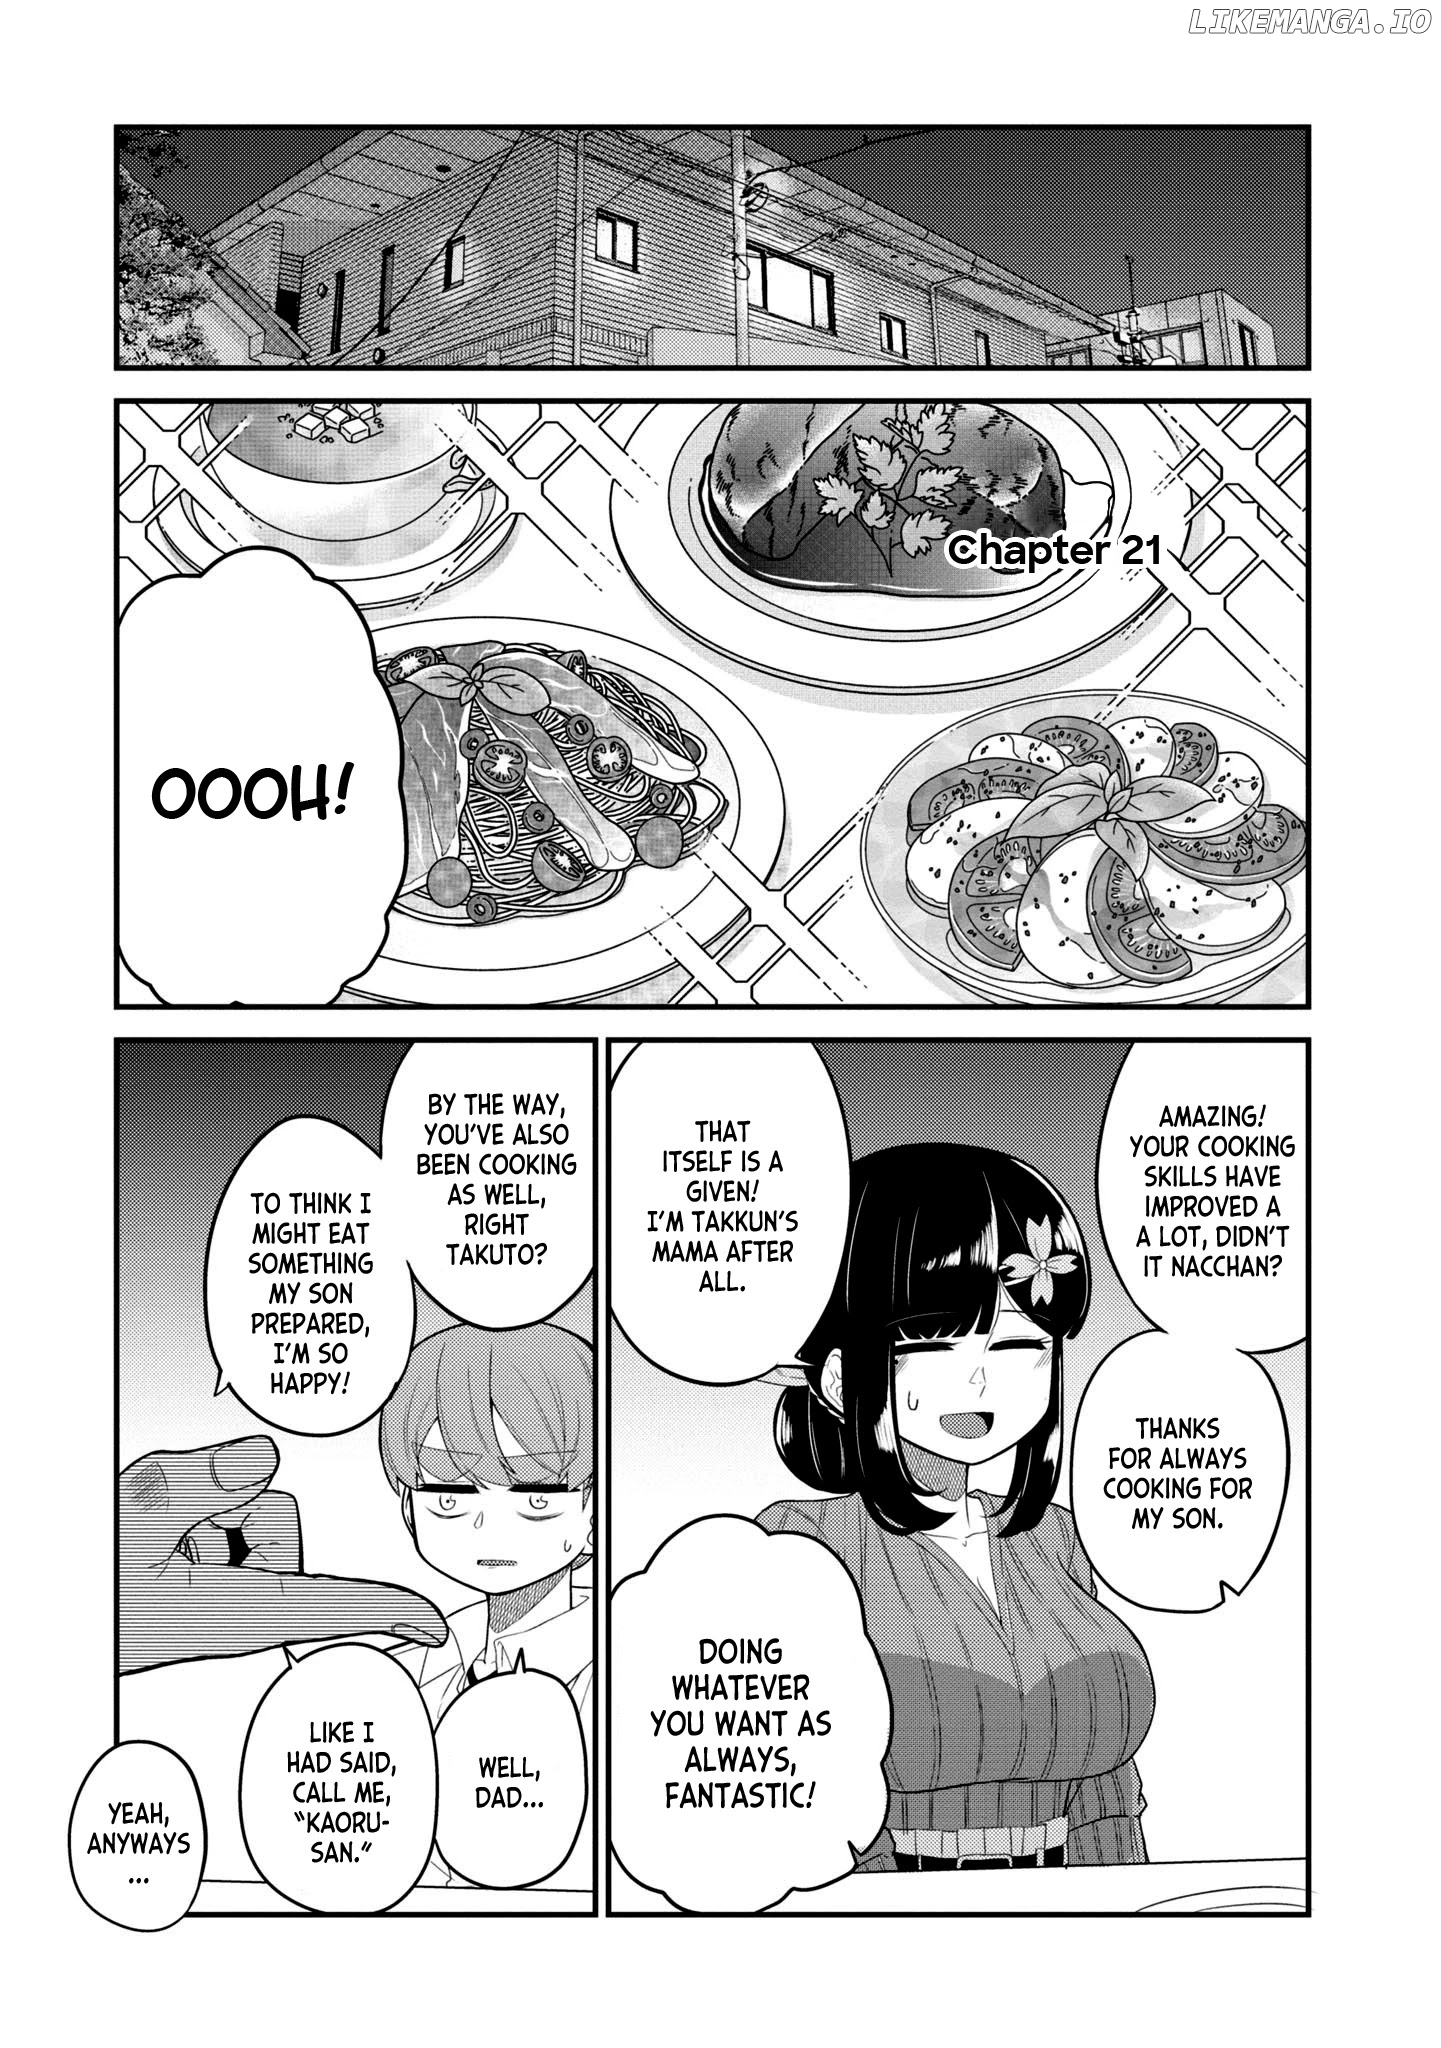 You Don't Want a Childhood Friend as Your Mom? chapter 21 - page 1